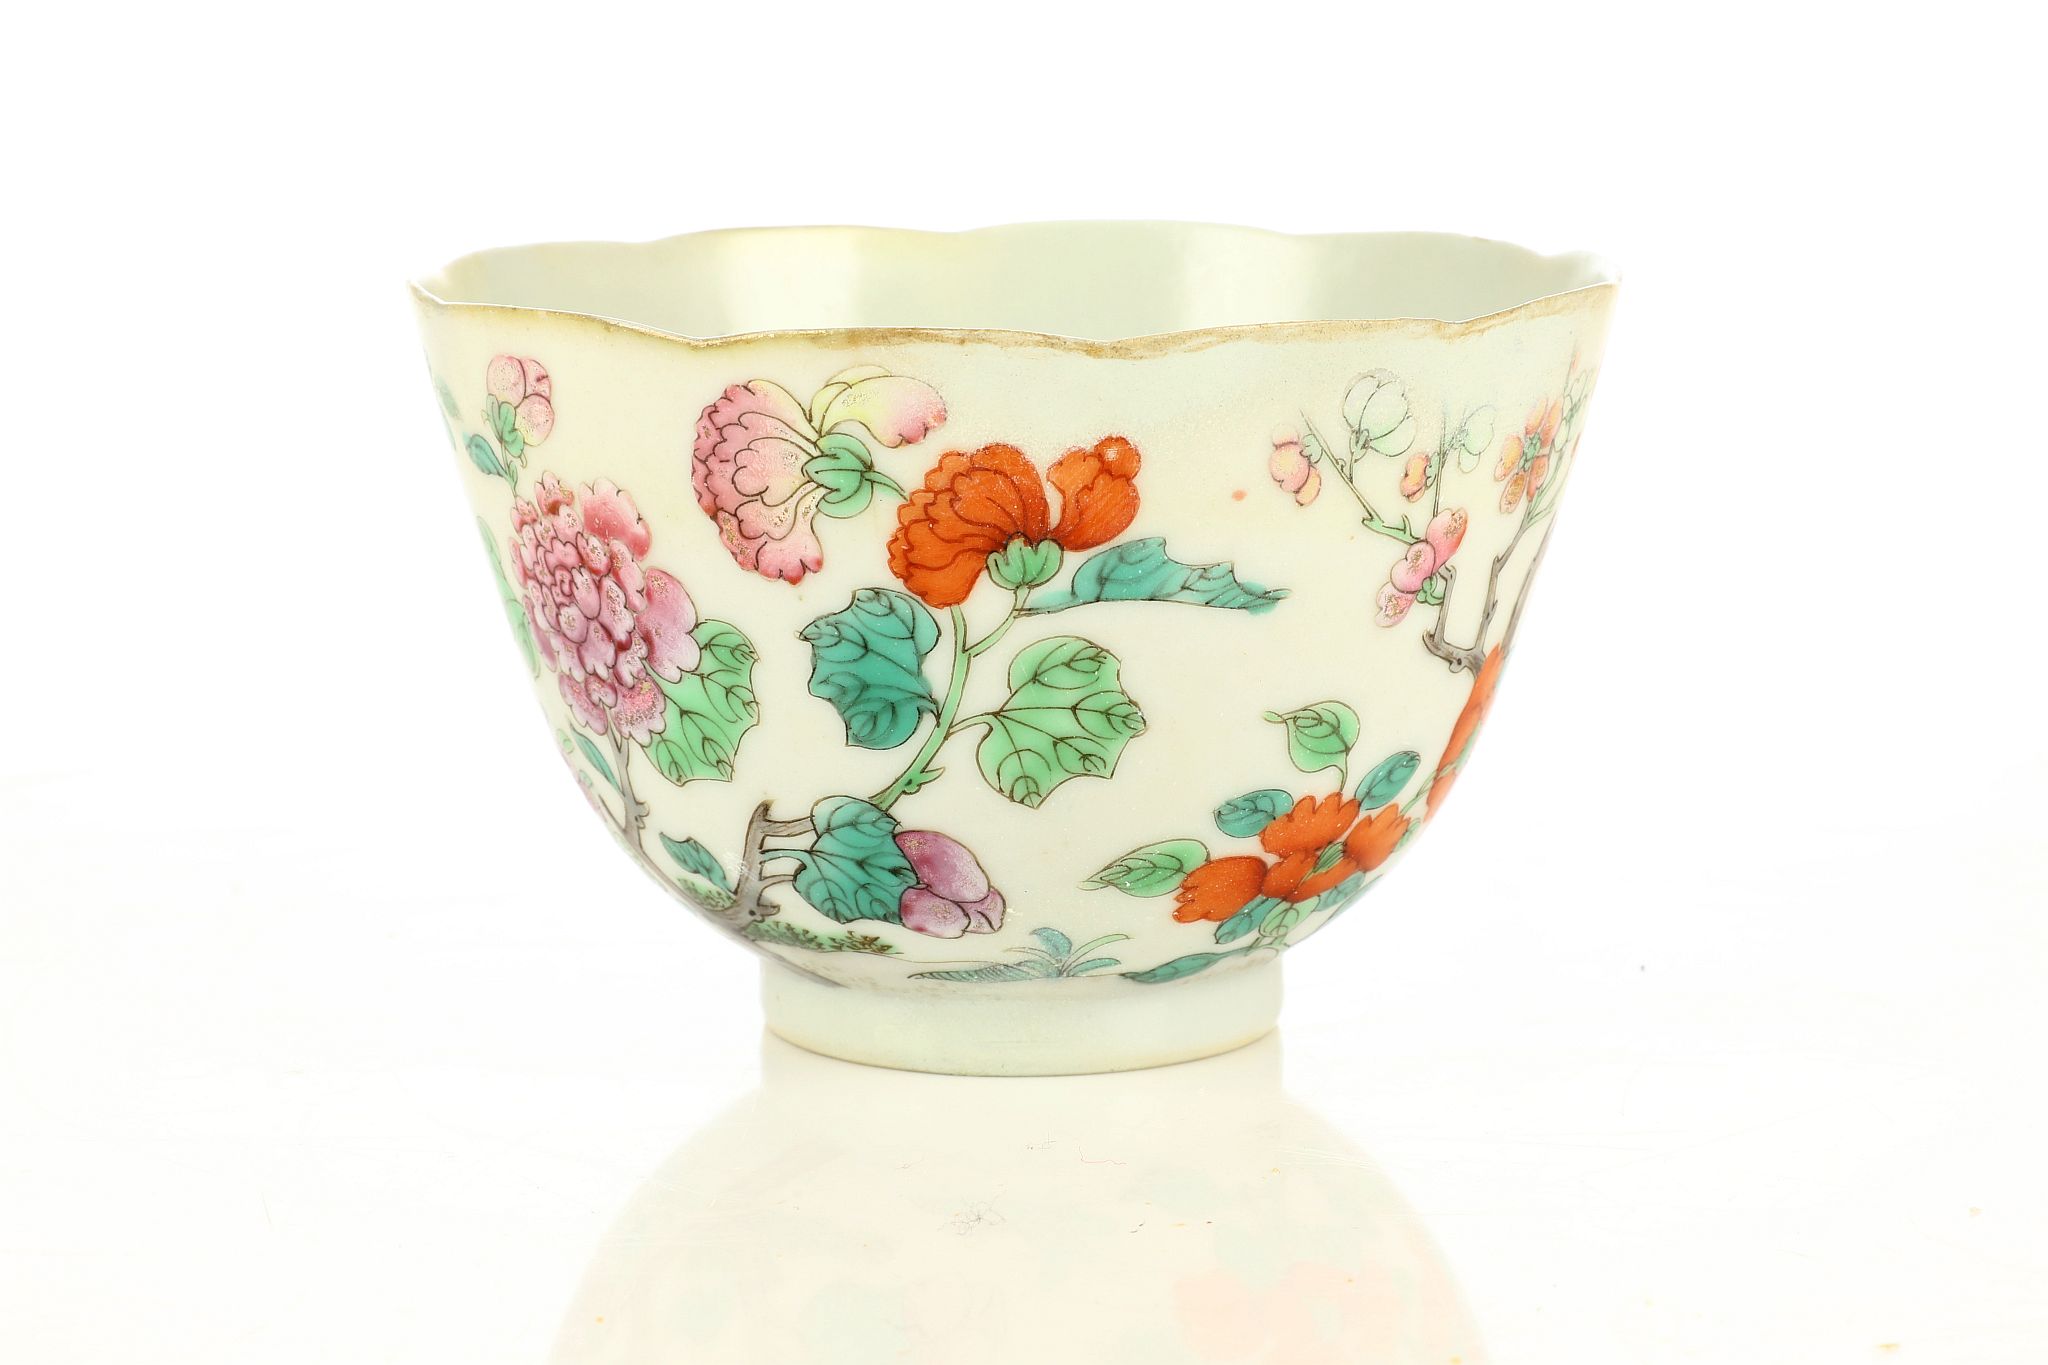 A Chinese famille rose scalloped rim edge bowl, Jiaqing seal (1795 - 1820) mark and probably of